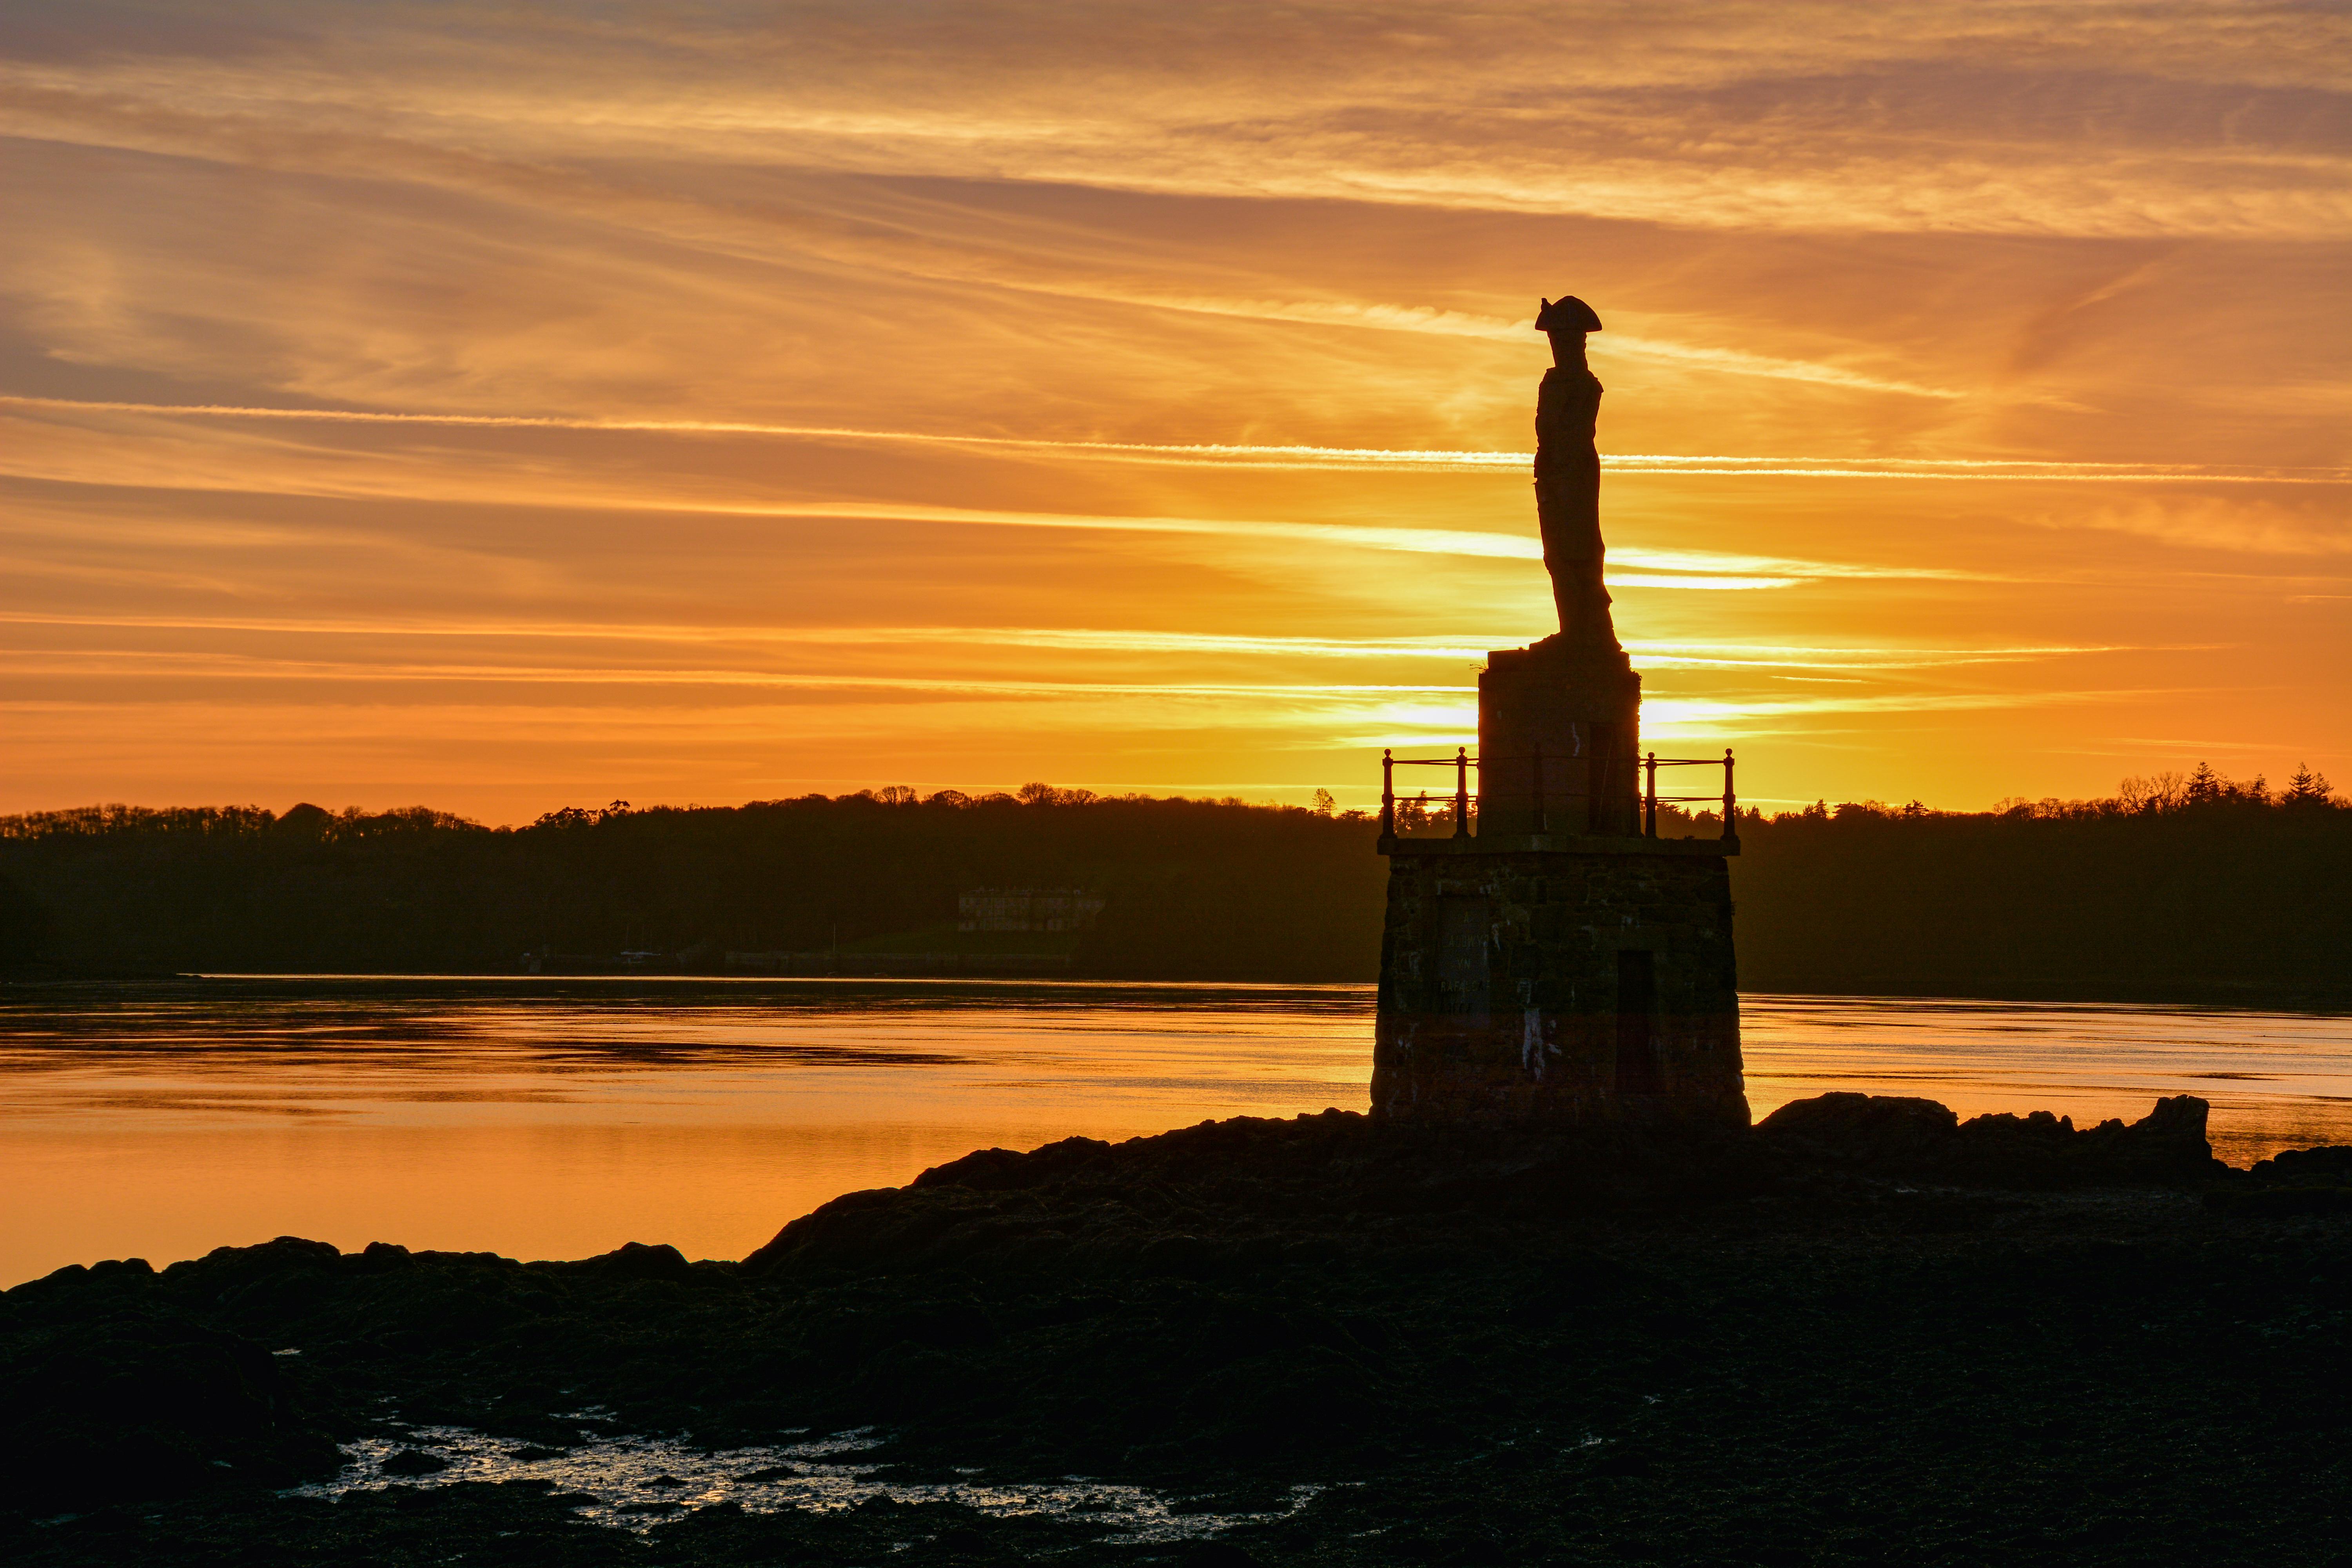 sunset over nelsons statue on the menai strait on anglesey